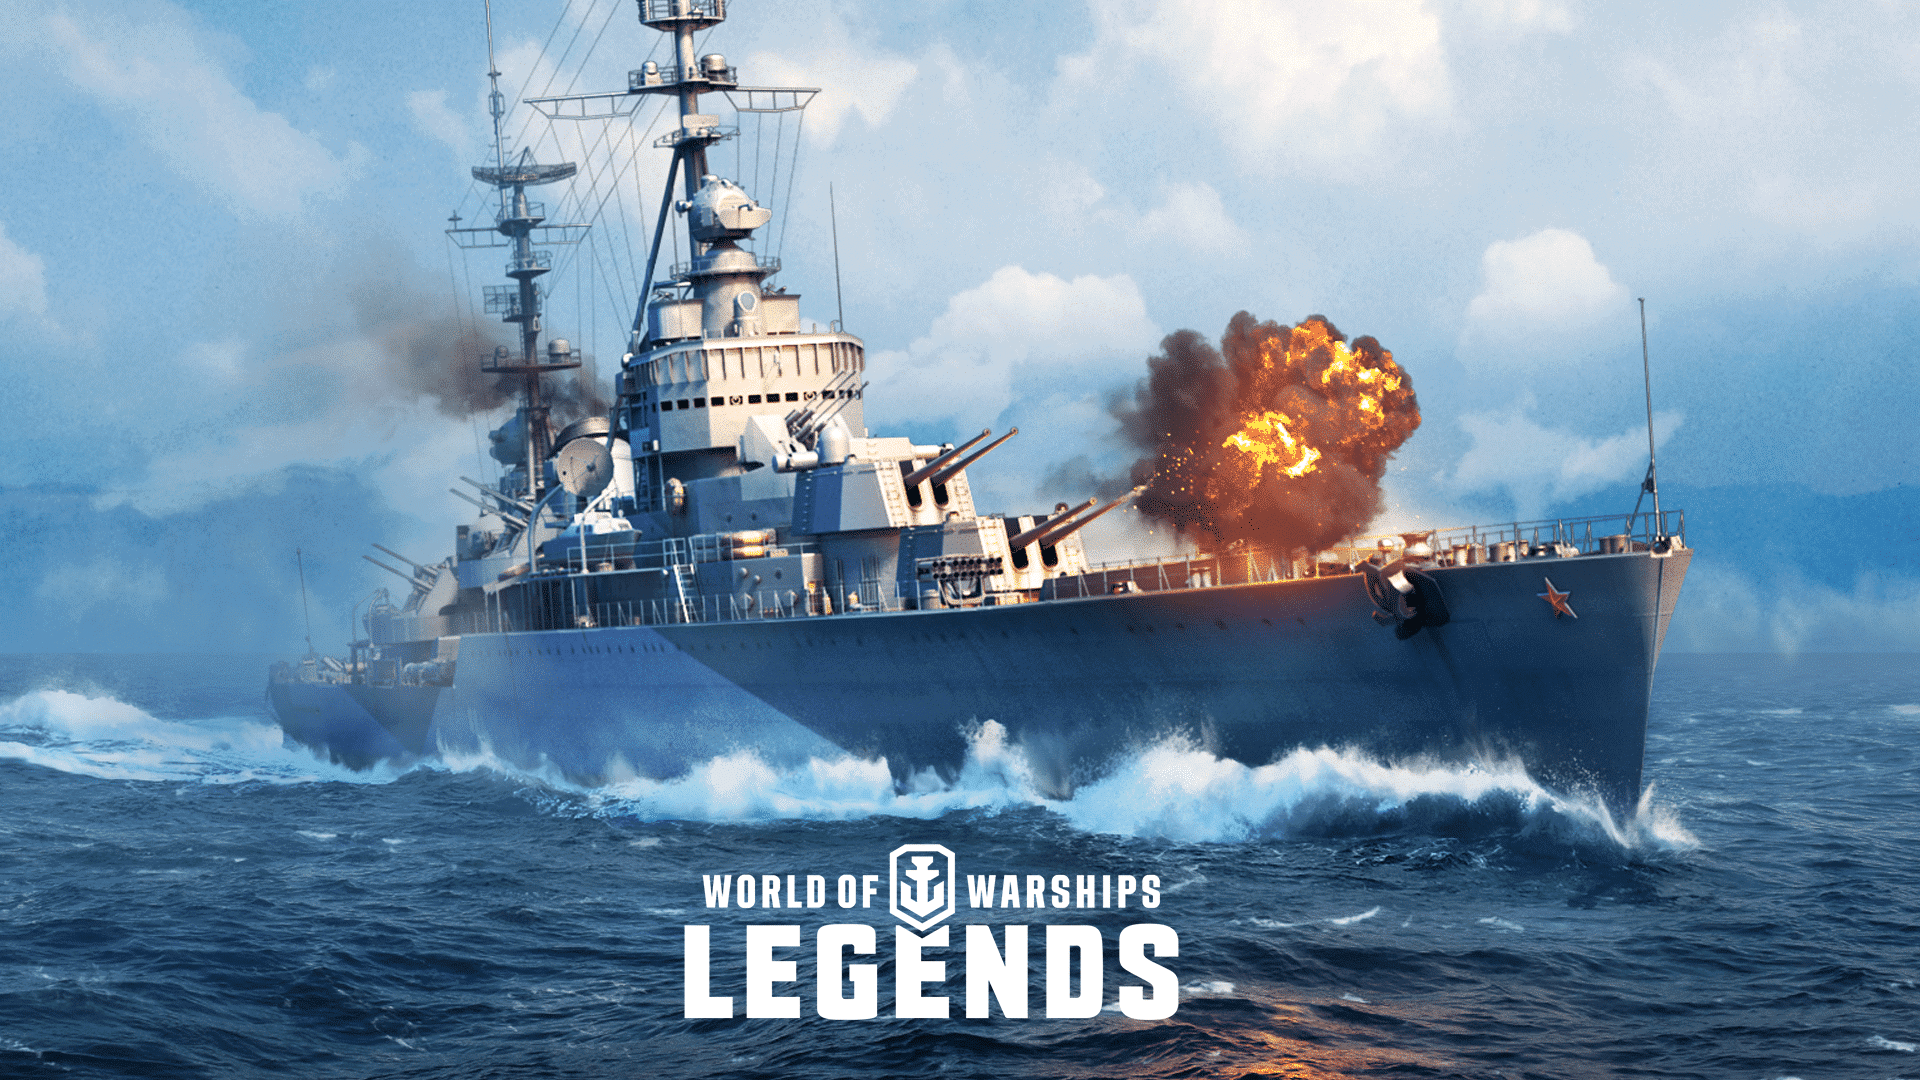 what was the update for world of warships legends